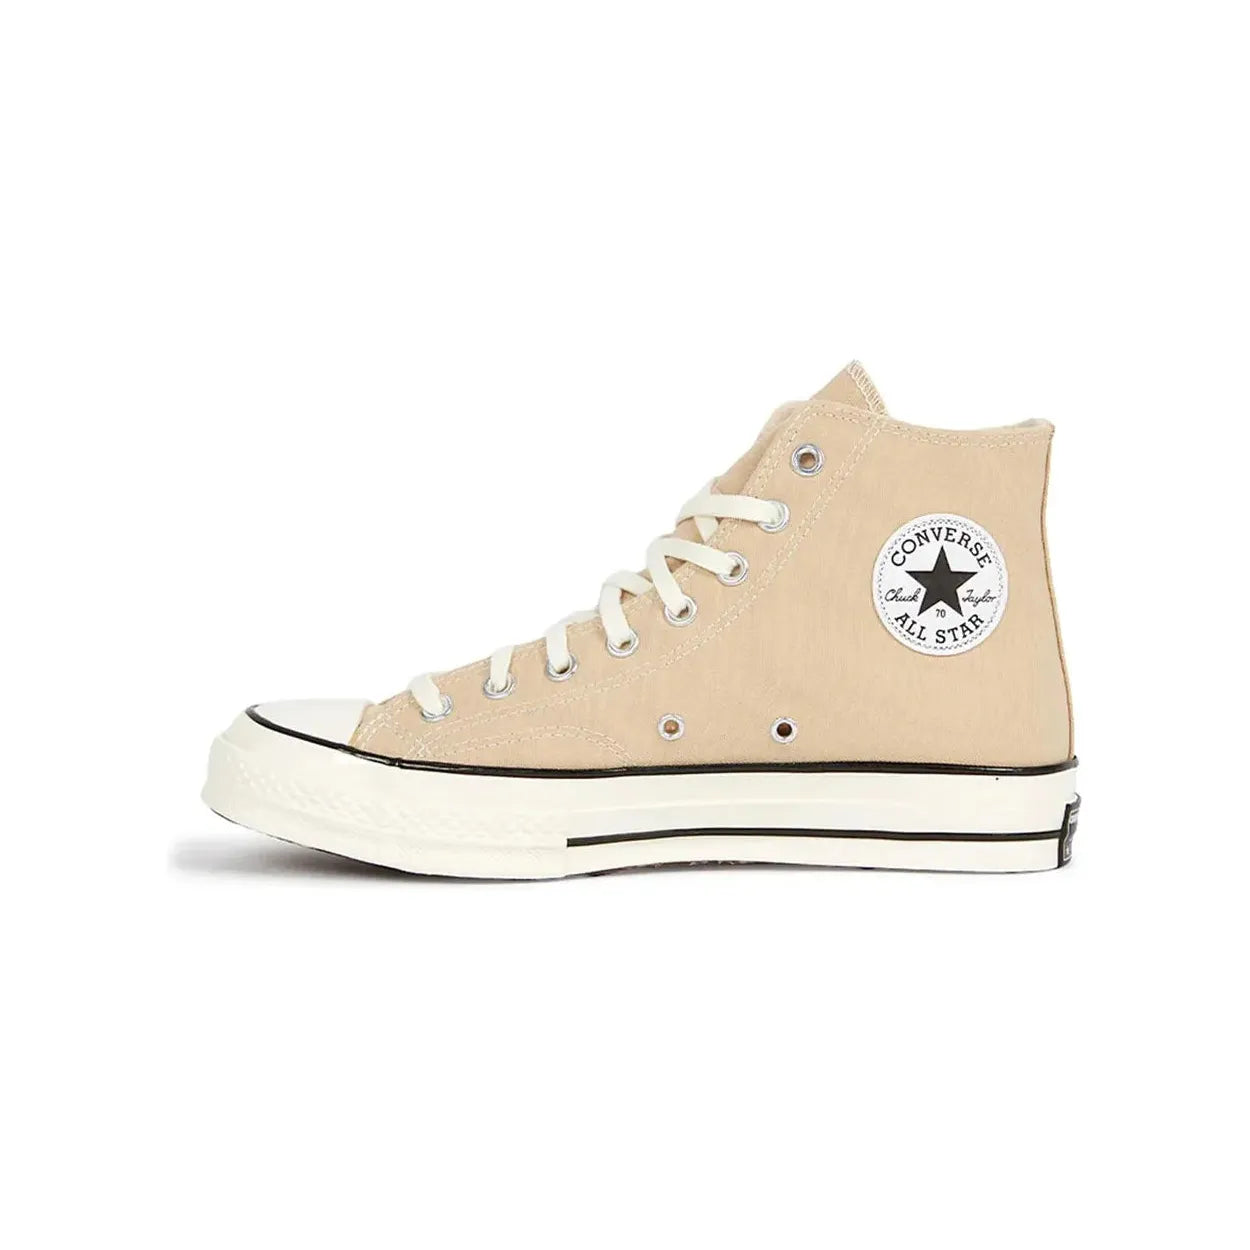 Pigalle x Nike x Converse